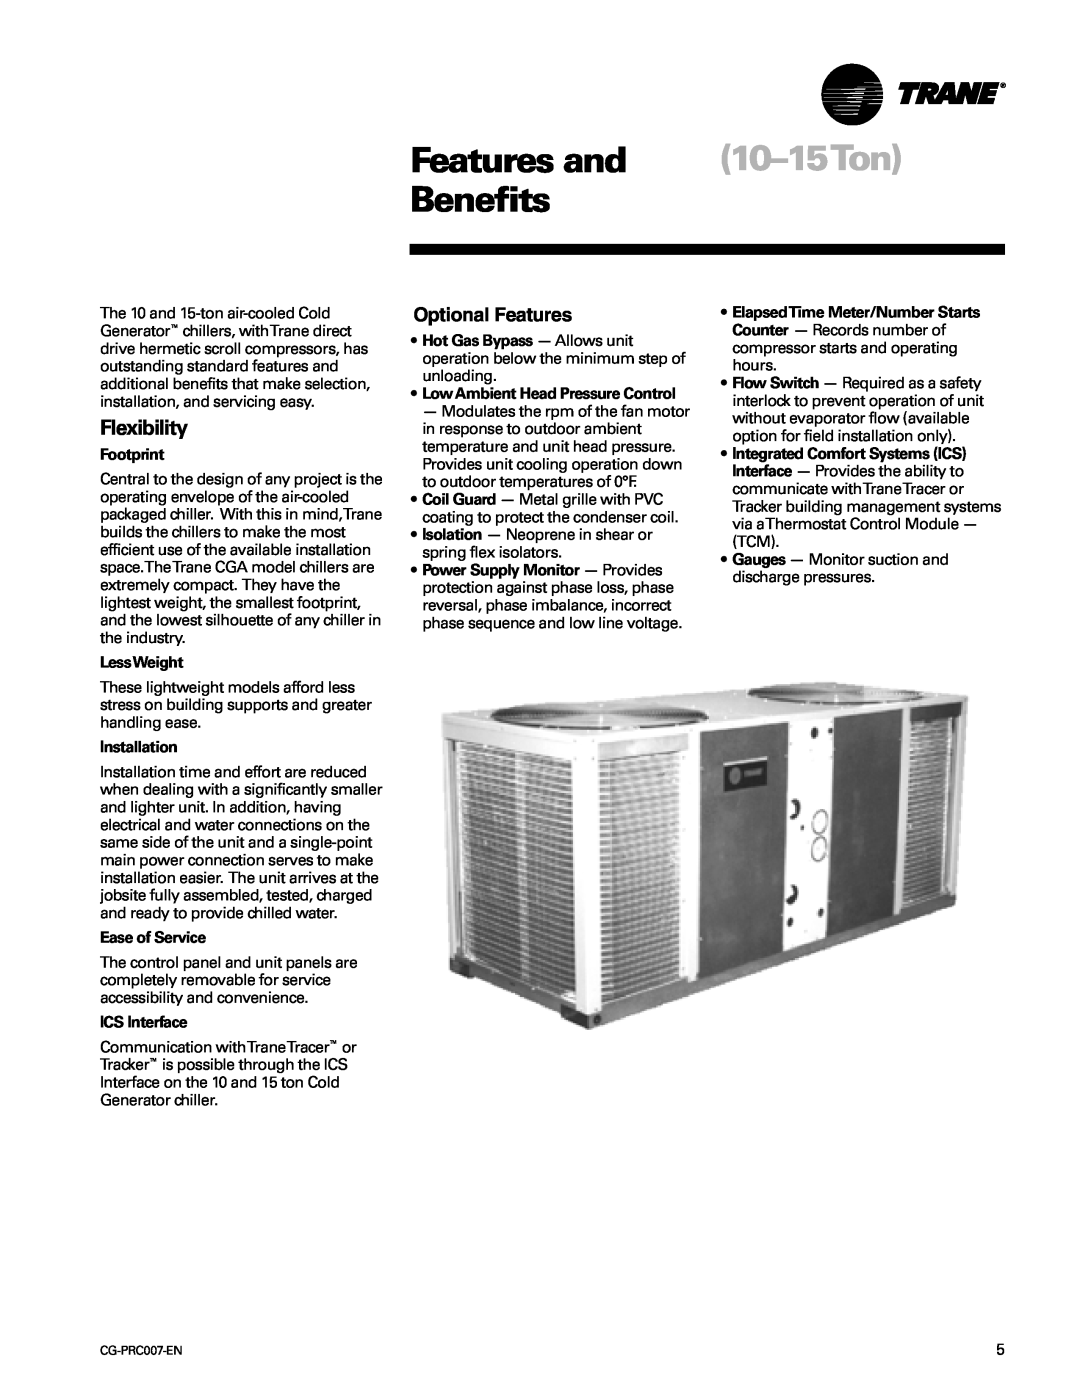 Trane CG-PRC007-EN 10-15Ton, Features and, Benefits, Flexibility, Optional Features, Footprint, LessWeight, Installation 